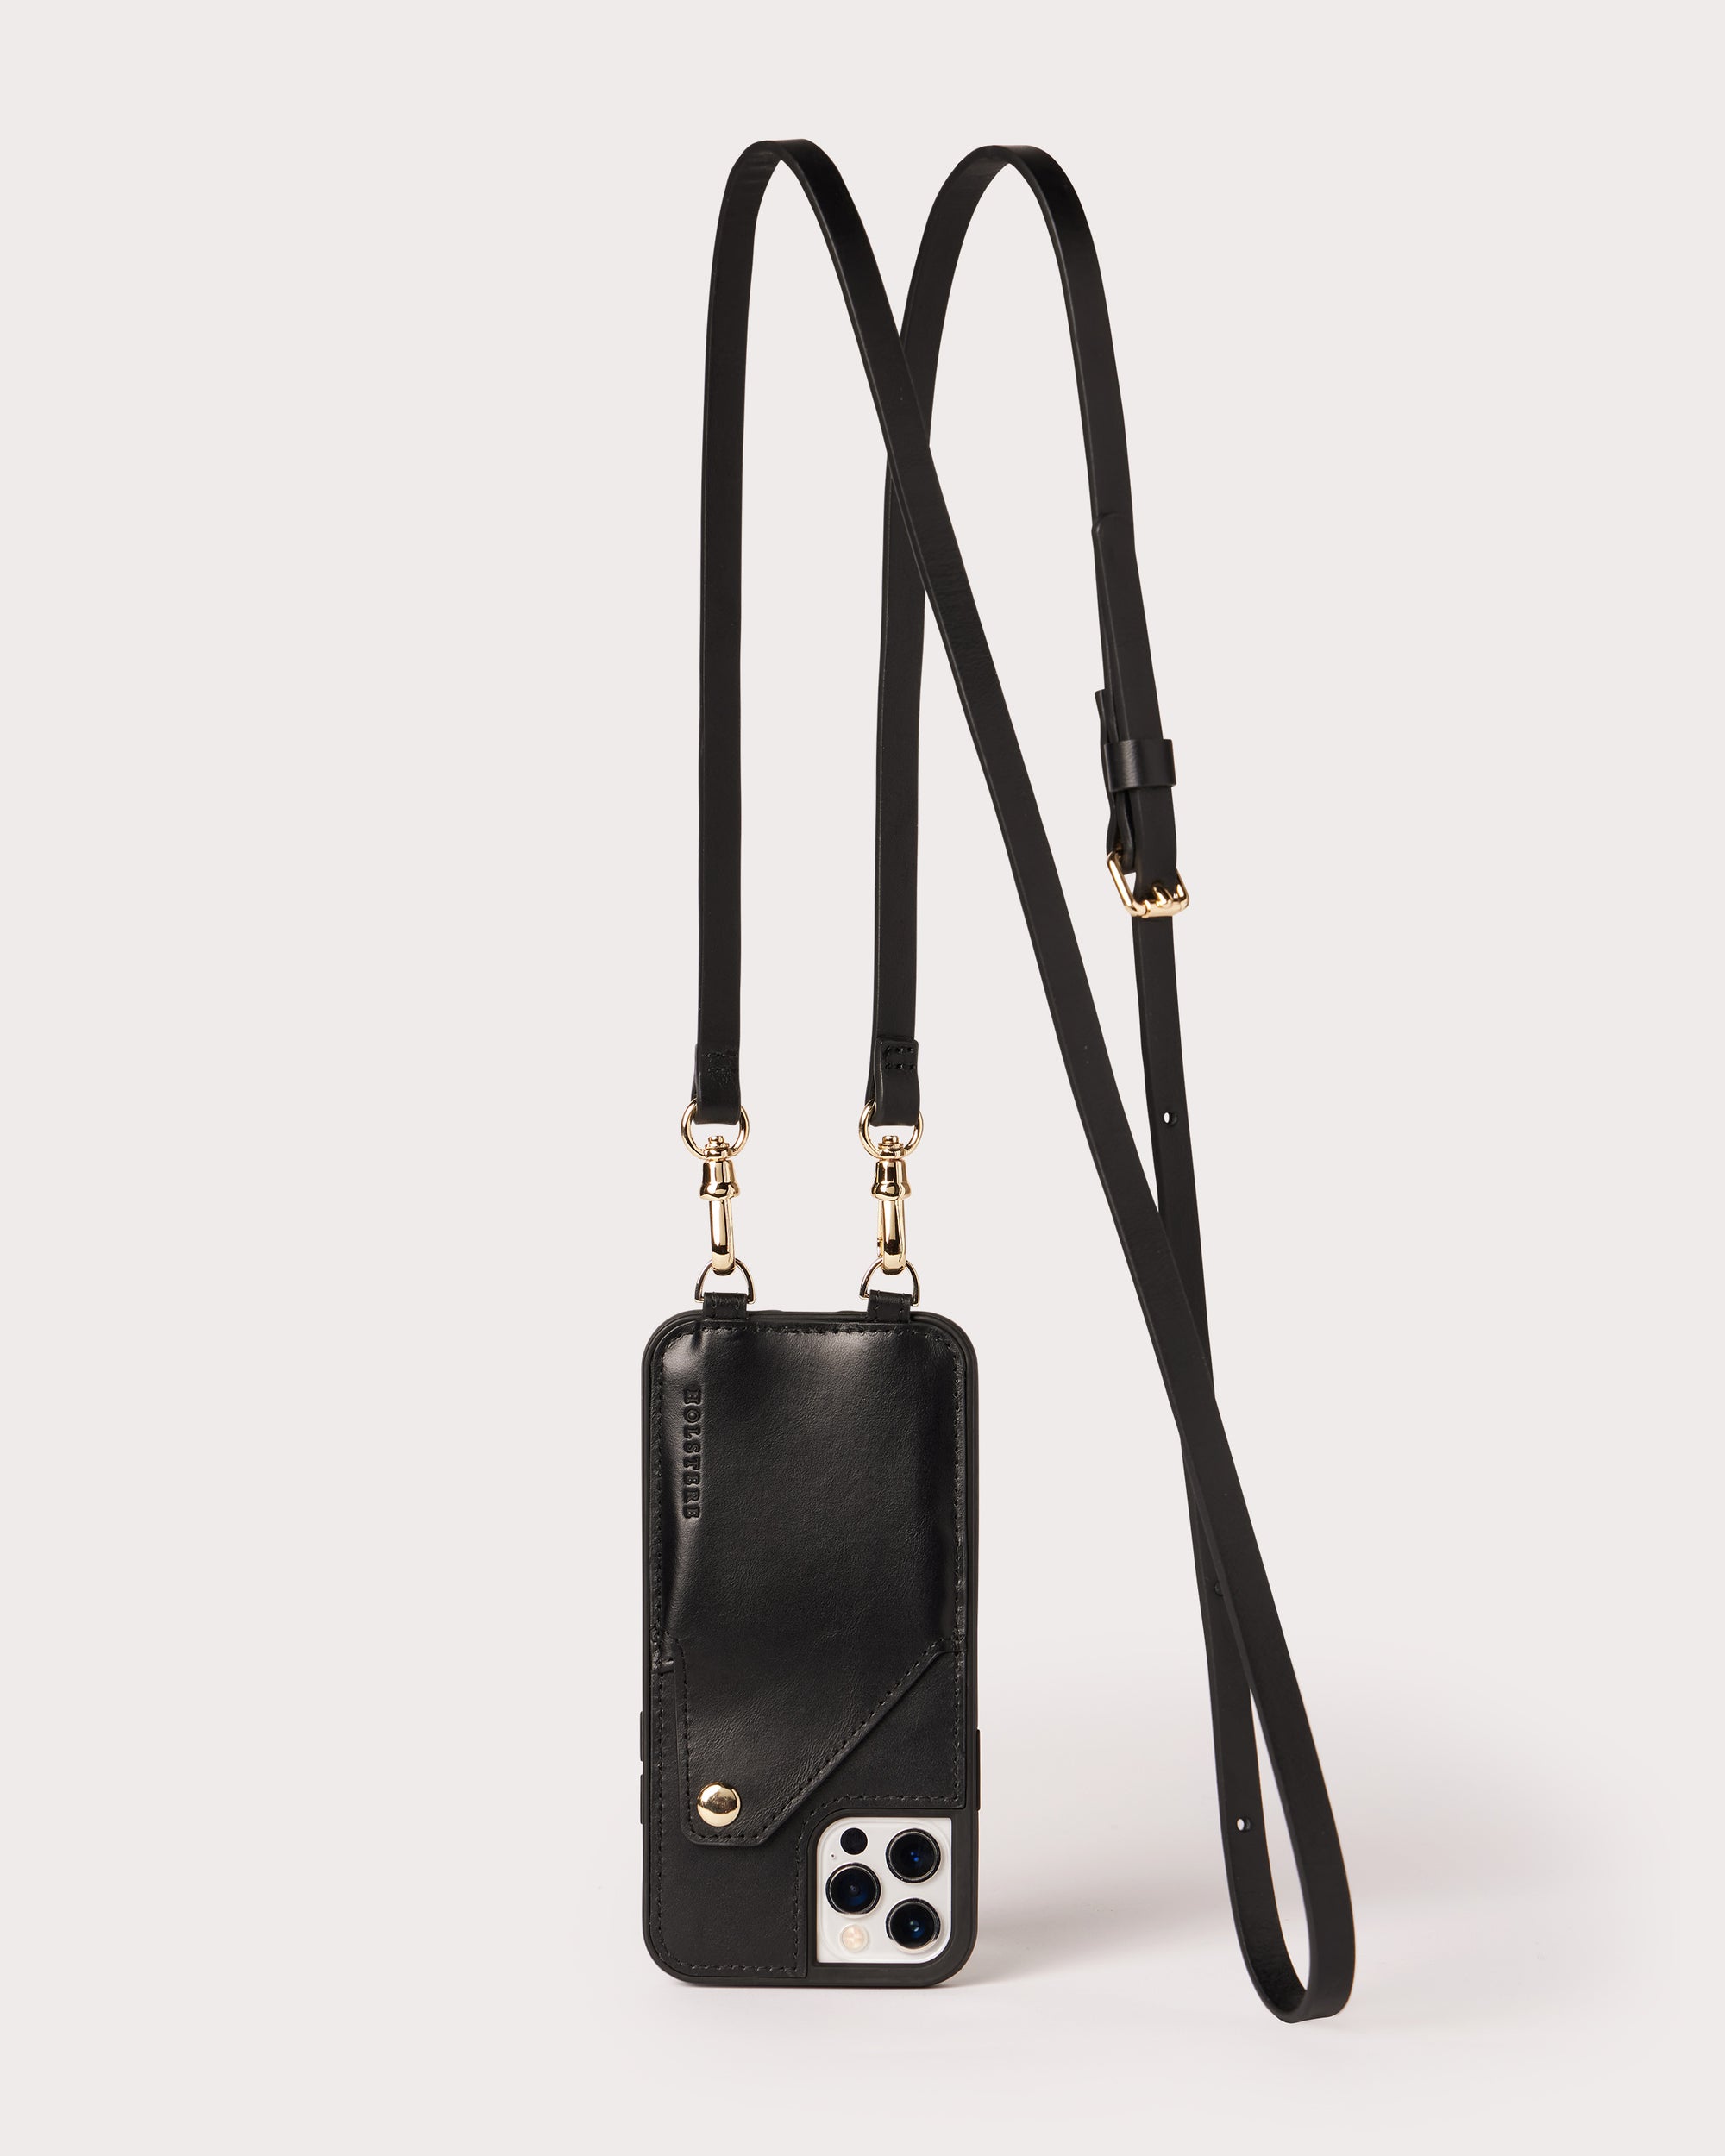 Holstere Replacement / Extra Strap for The London Black - Genuine Leather Adjustable Strap with Gold Hardware